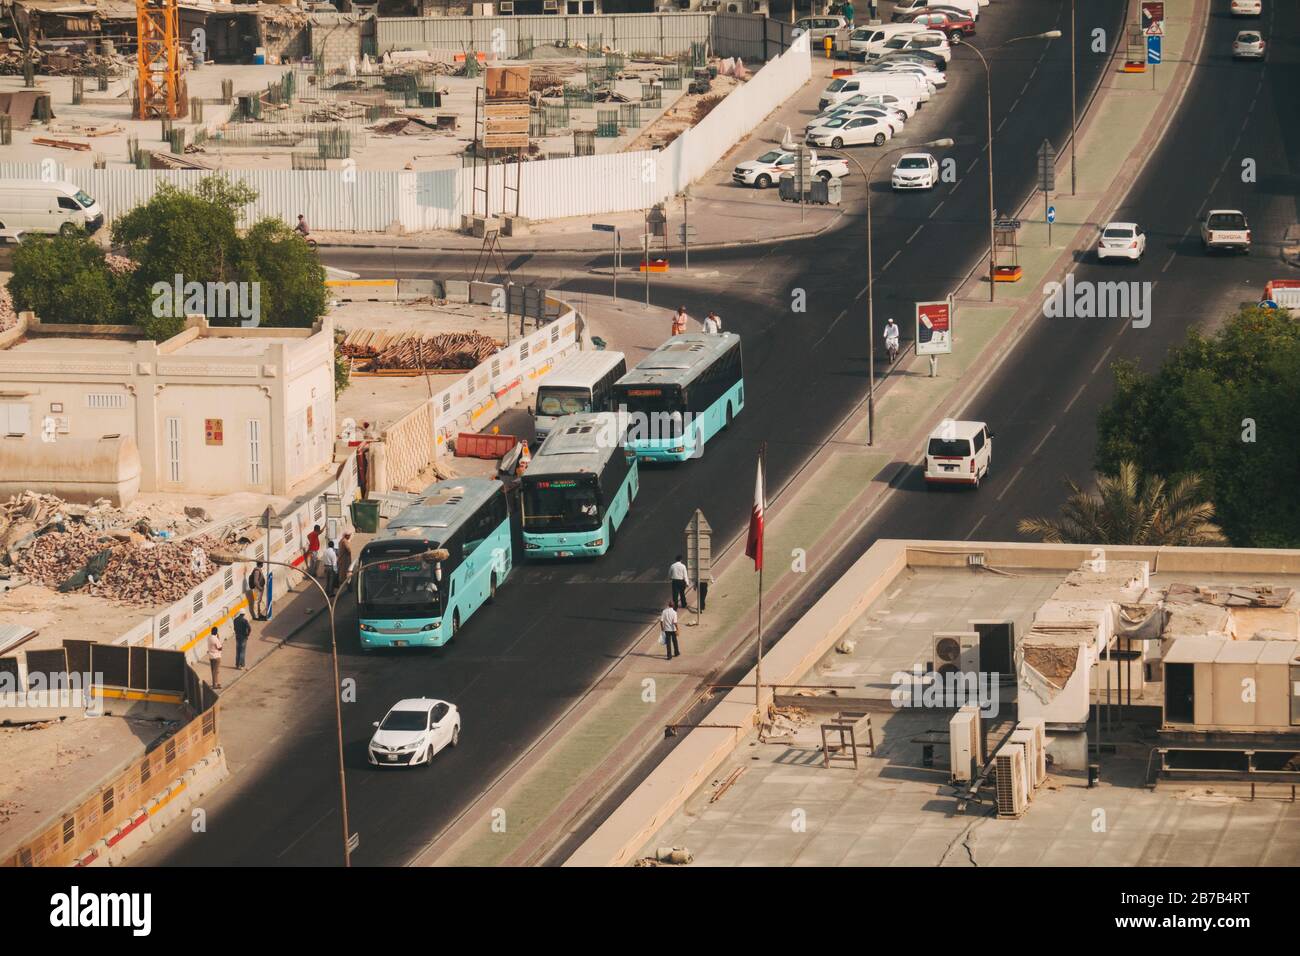 Distinctive turquoise Karwa public transport buses in Doha, Qatar, pull over at a road side bus stop in the city Stock Photo